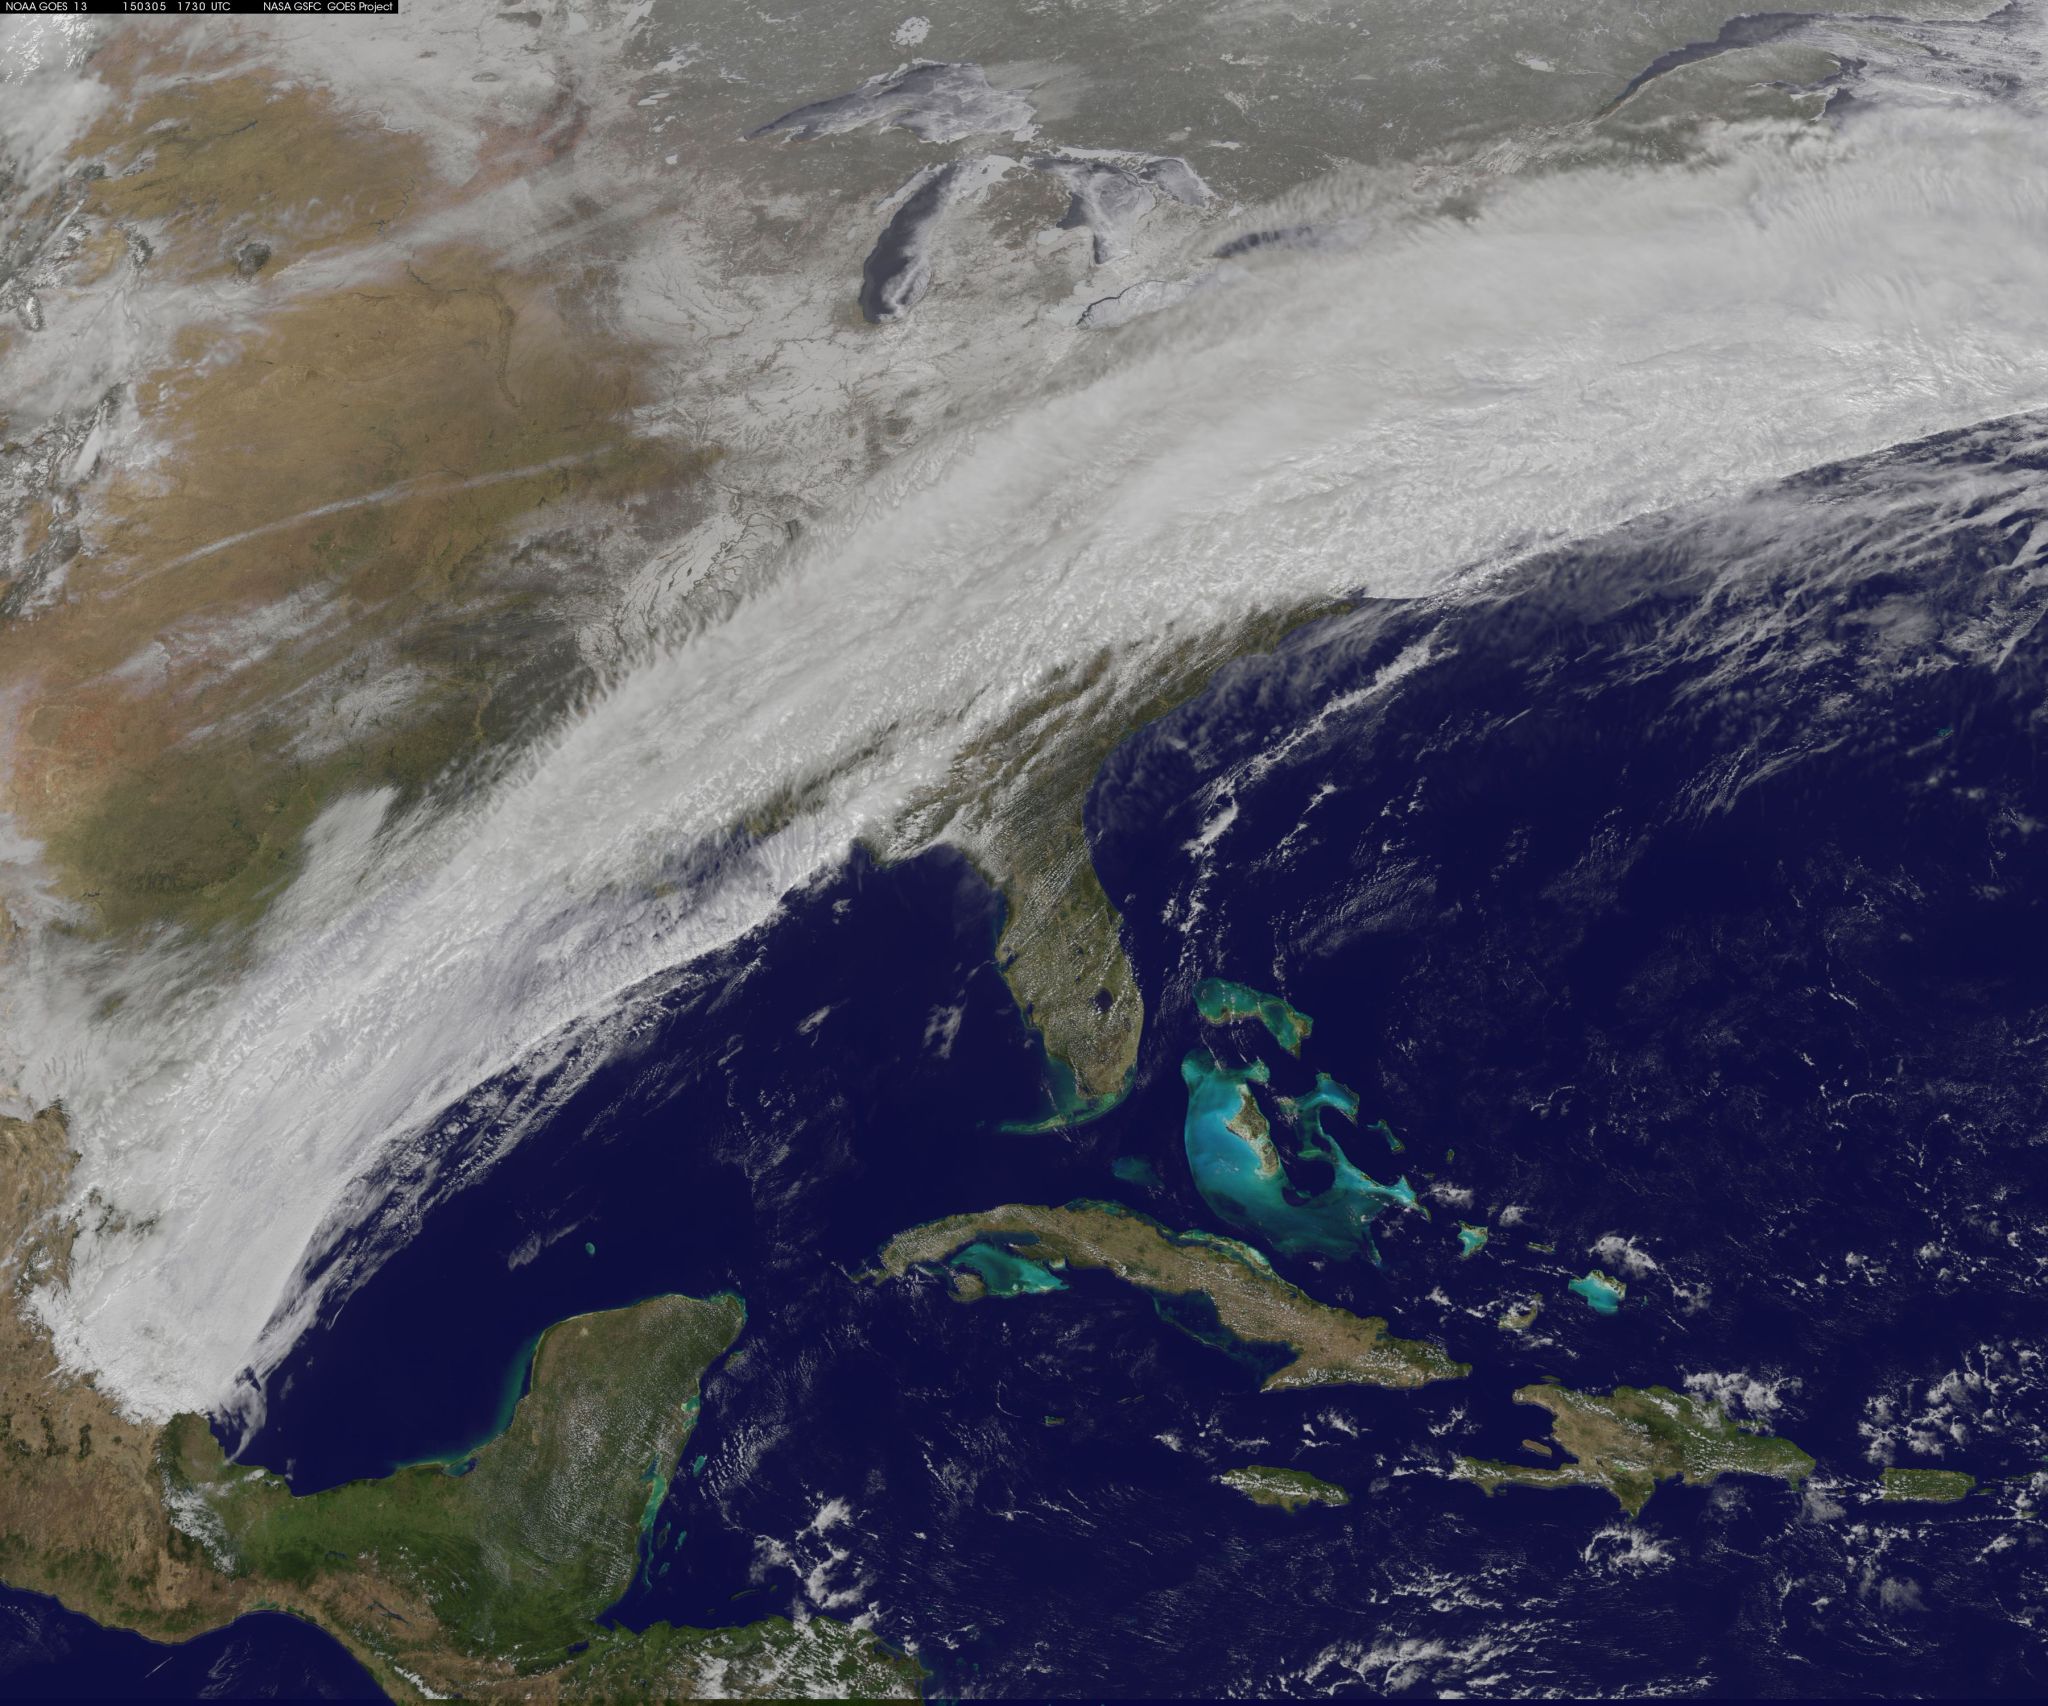 GOES-East image from March 5 of snowstorm. A streak of white cloud obscures the ground from eastern Mexico along the Atlantic coast of the US.